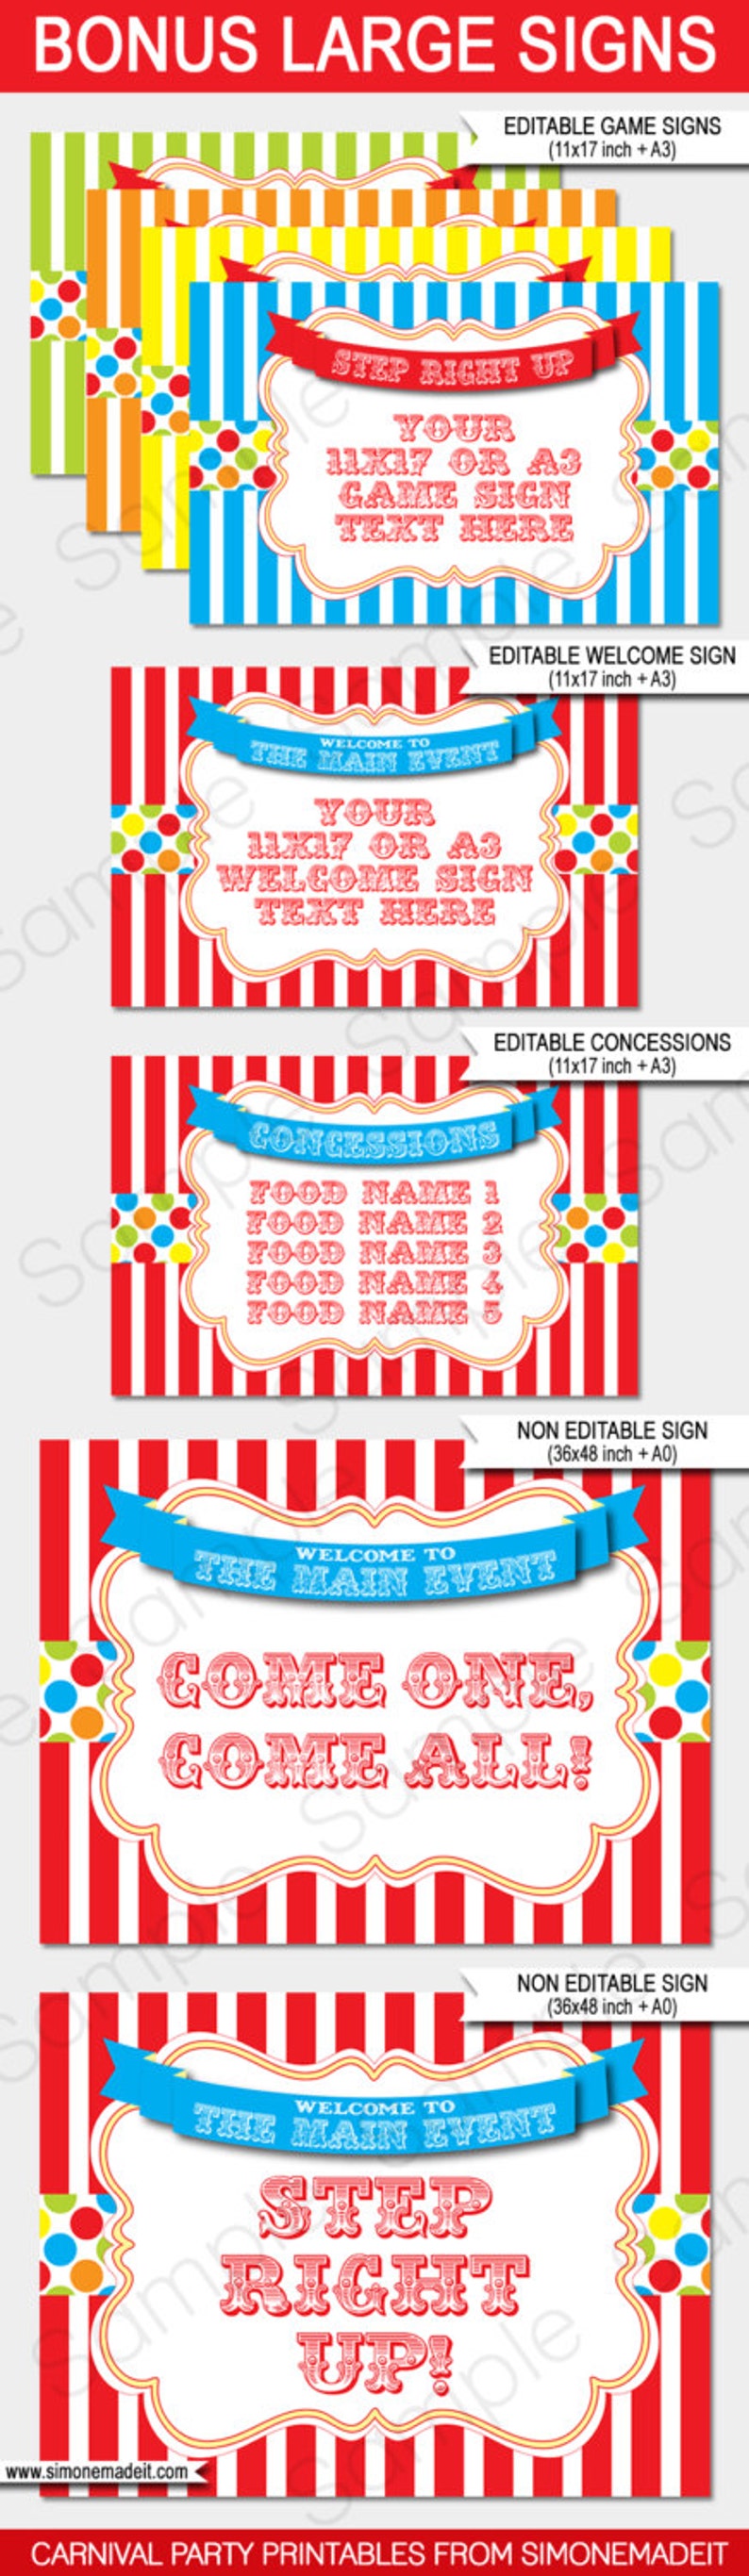 Carnival Sign Templates - Printable Birthday Party Decorations - Concessions - Games - Come One Come All - Step Right Up - Circus Theme - INSTANT DOWNLOAD - EDITABLE Text